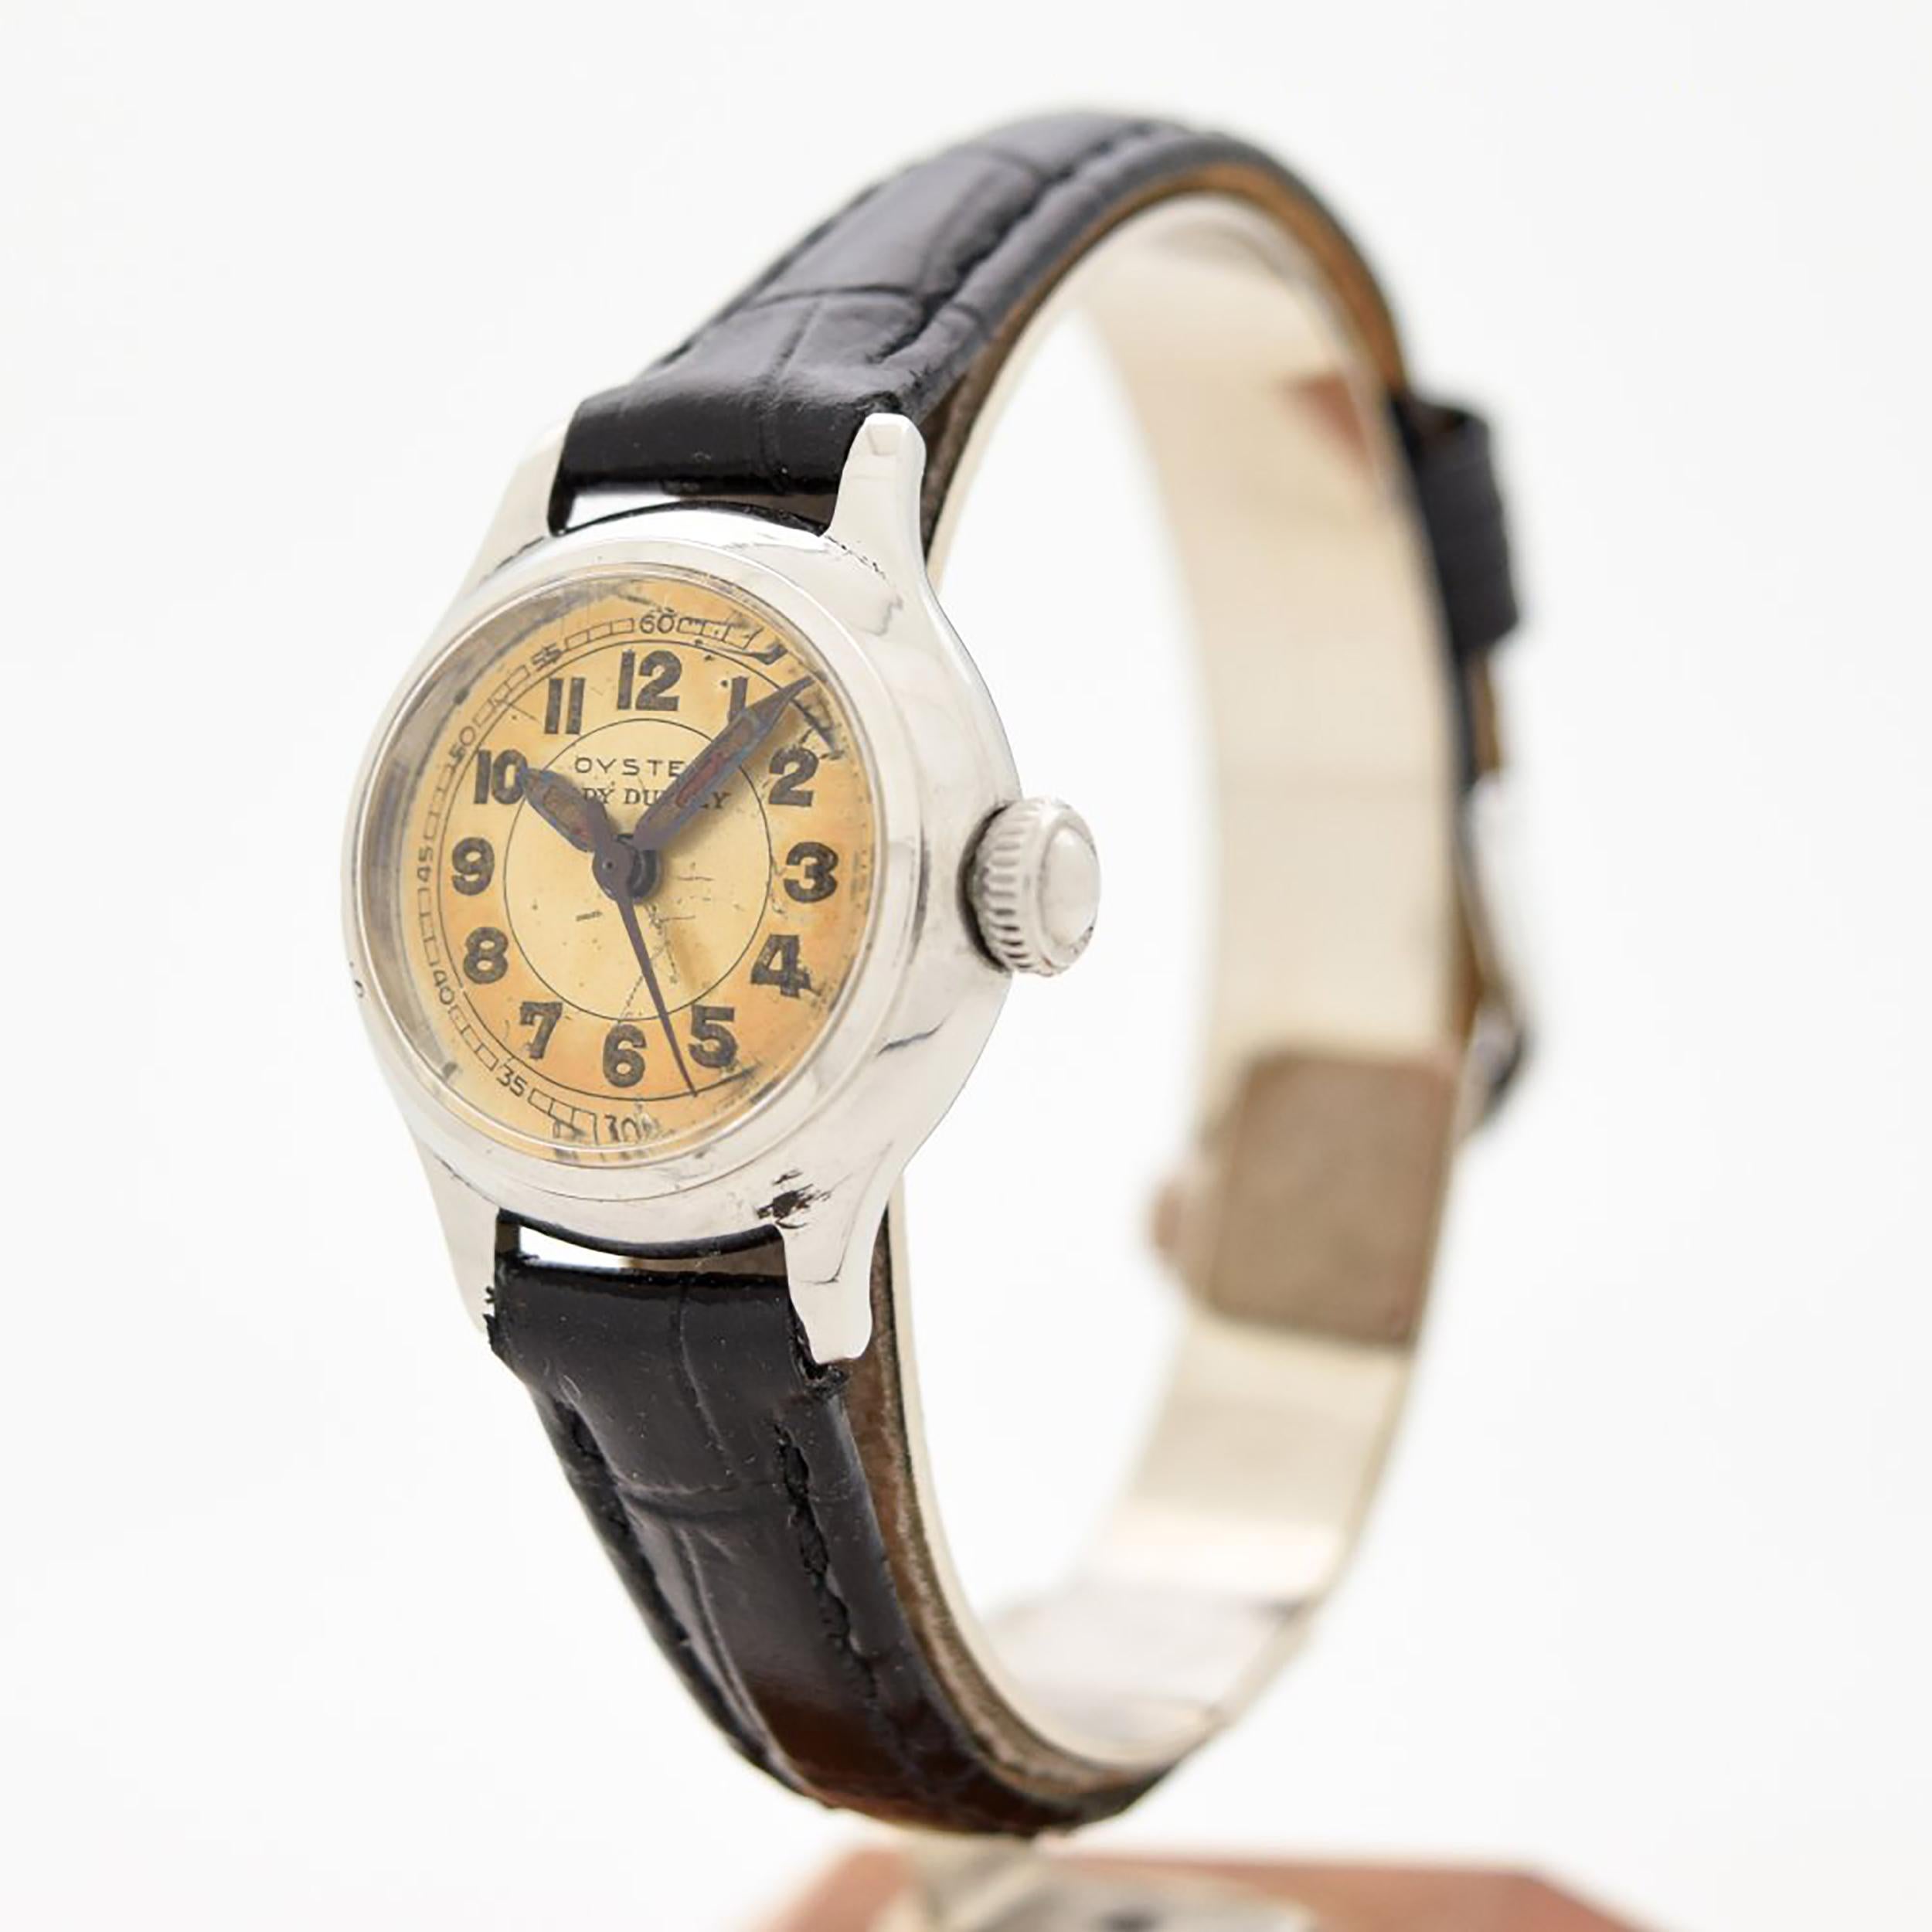 1952 Vintage Oyster by Rolex Ladies Lady Dudley Ref. 3640 Stainless Steel watch with Original Patina Two Tone Gray and Silver Dial with Luminous Arabic Numbers. 22mm x 27mm lug to lug (0.87 in. x 1.06 in.) - Powered by a 17-jewel, manual caliber